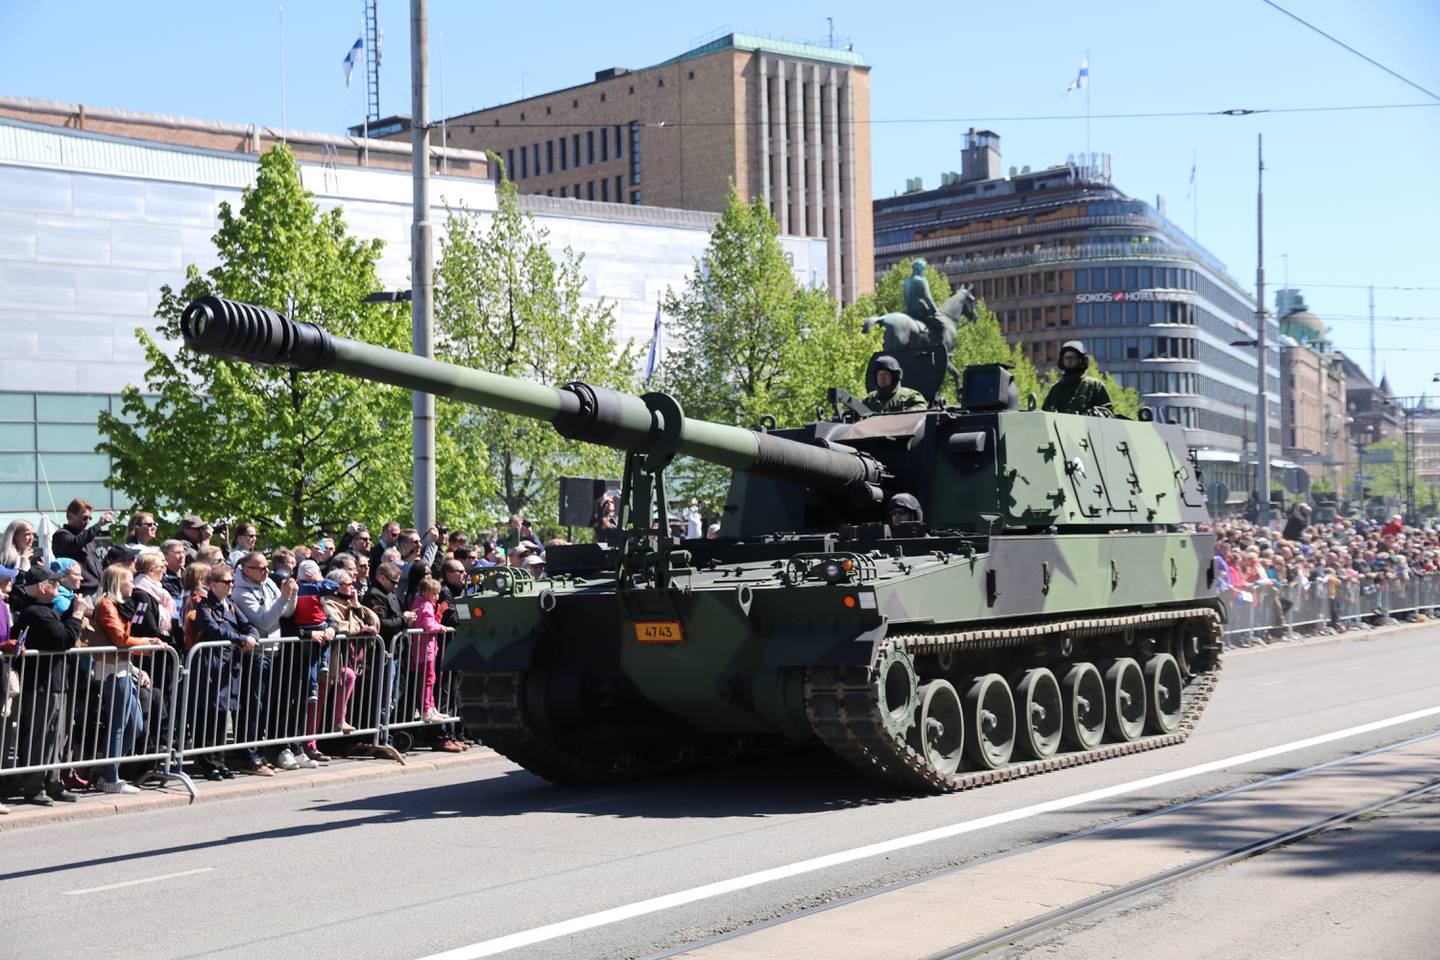 A K9 Thunder at the Finnish defence forces flag day parade. Photo: Wikimedia Commons